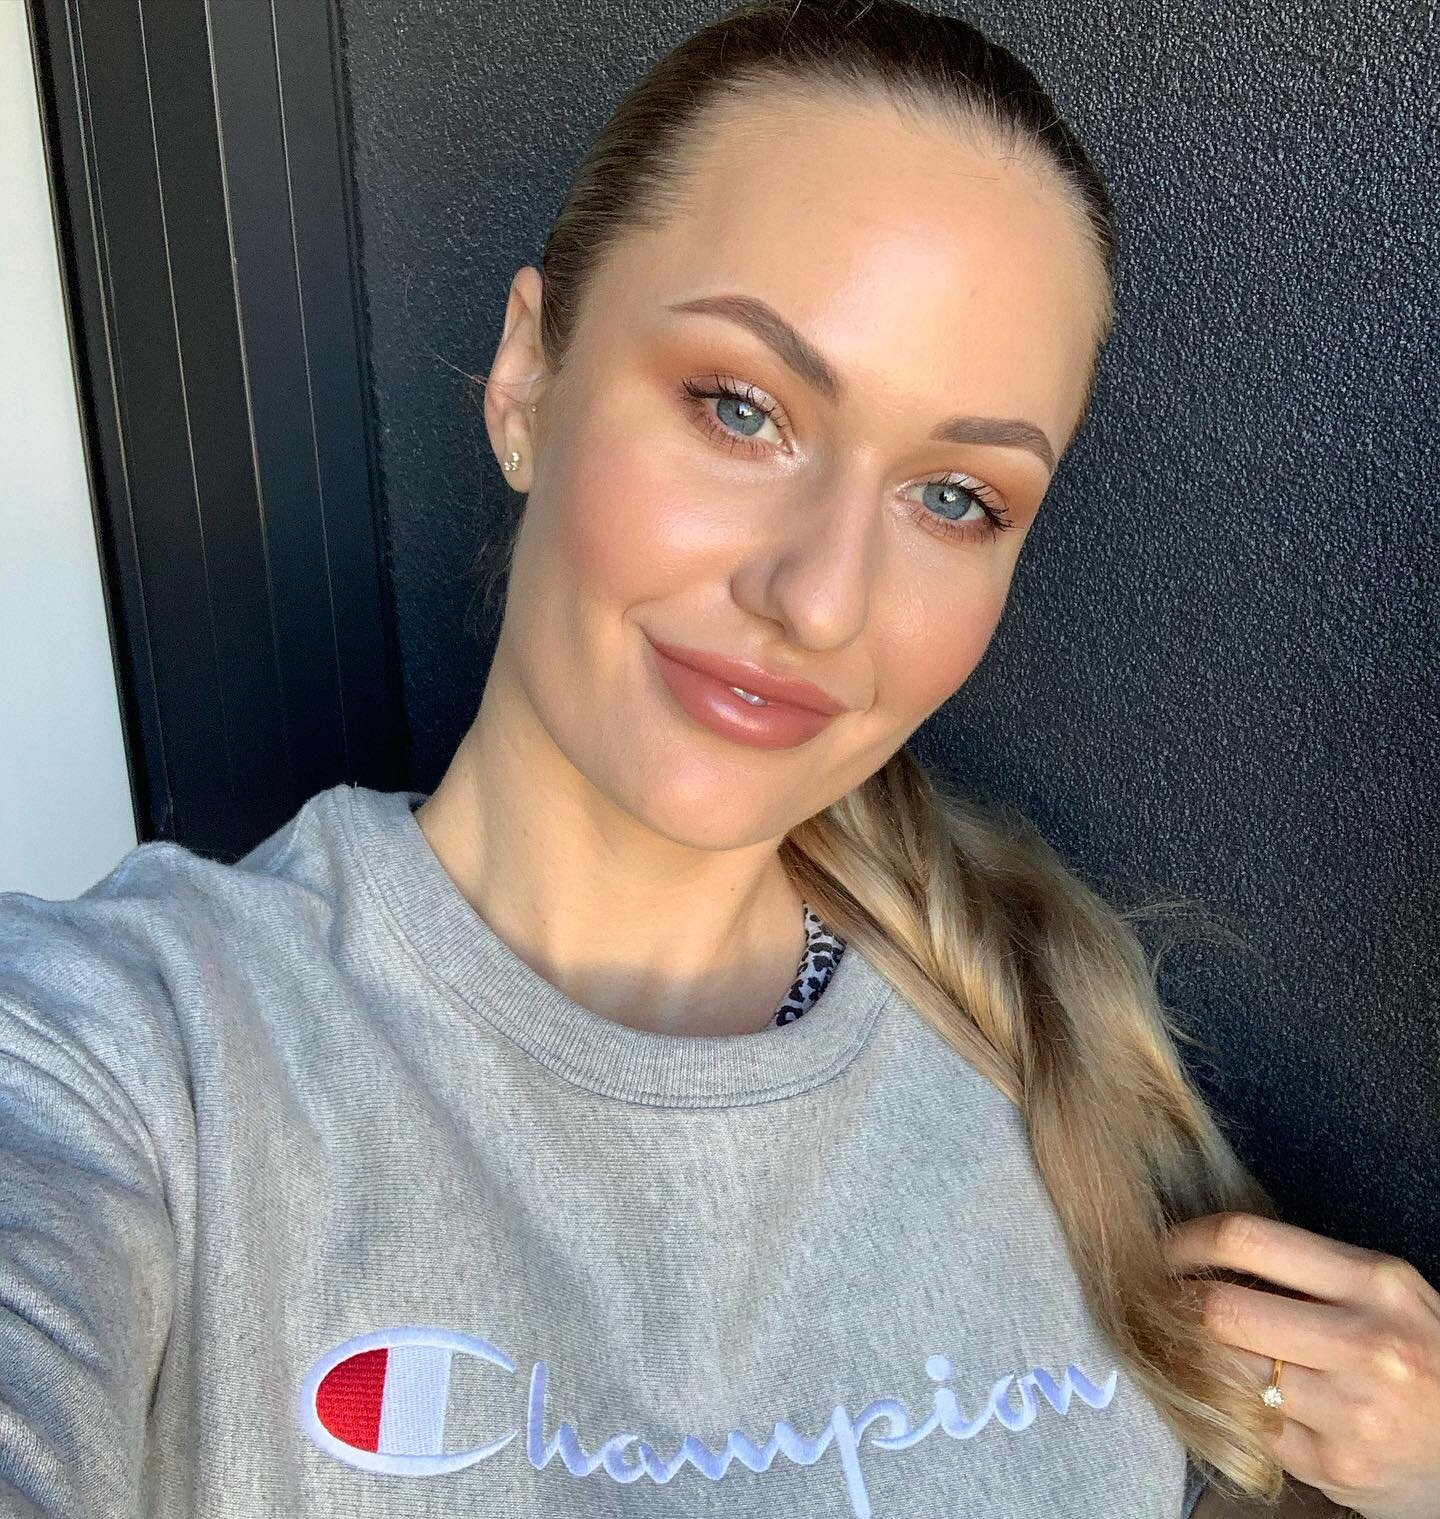 Comfy &amp; perhaps a champion.... 🤔Fresh everyday makeup. My all time go to ✨ Bronzer on the cheeks and eyes, lipstick on the lips and cheeks. Keep it simple!